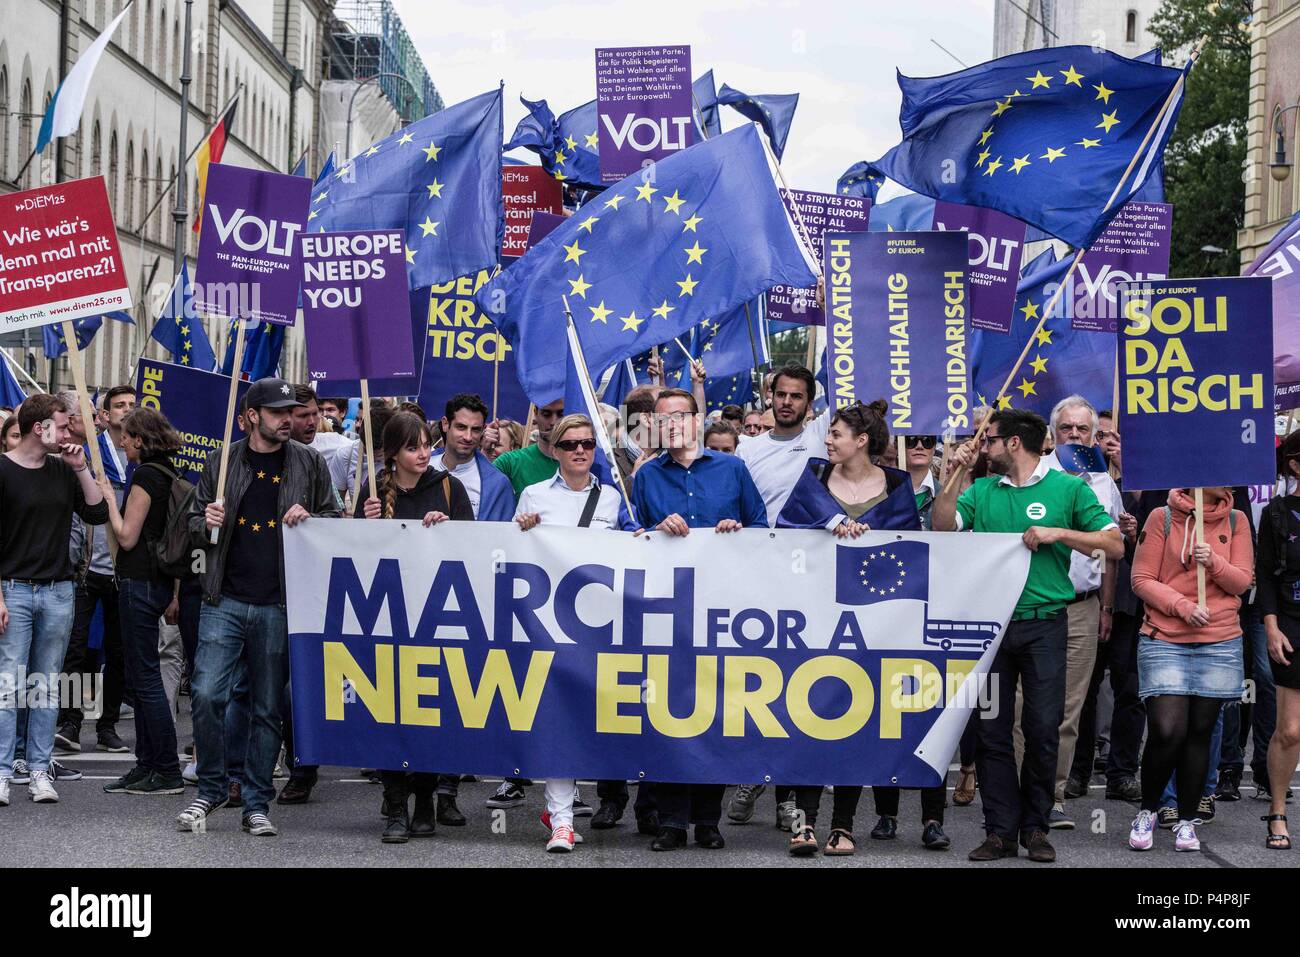 Munich, Bavaria, Germany. 23rd June, 2018. Citizens of Munich and Europe demonstrated under the banner of Ã¢â‚¬Å“March for a New EuropeÃ¢â‚¬Â in the face of disunity, right-wing, and populist movements. The group is essentially the Pulse of Europe organizers, who has seen radically declining support over the past year and has, despite claiming to be against racism and populism, welcomed Pegida to participate.  uling CSU party who has been accused of cre Credit: ZUMA Press, Inc./Alamy Live News Stock Photo